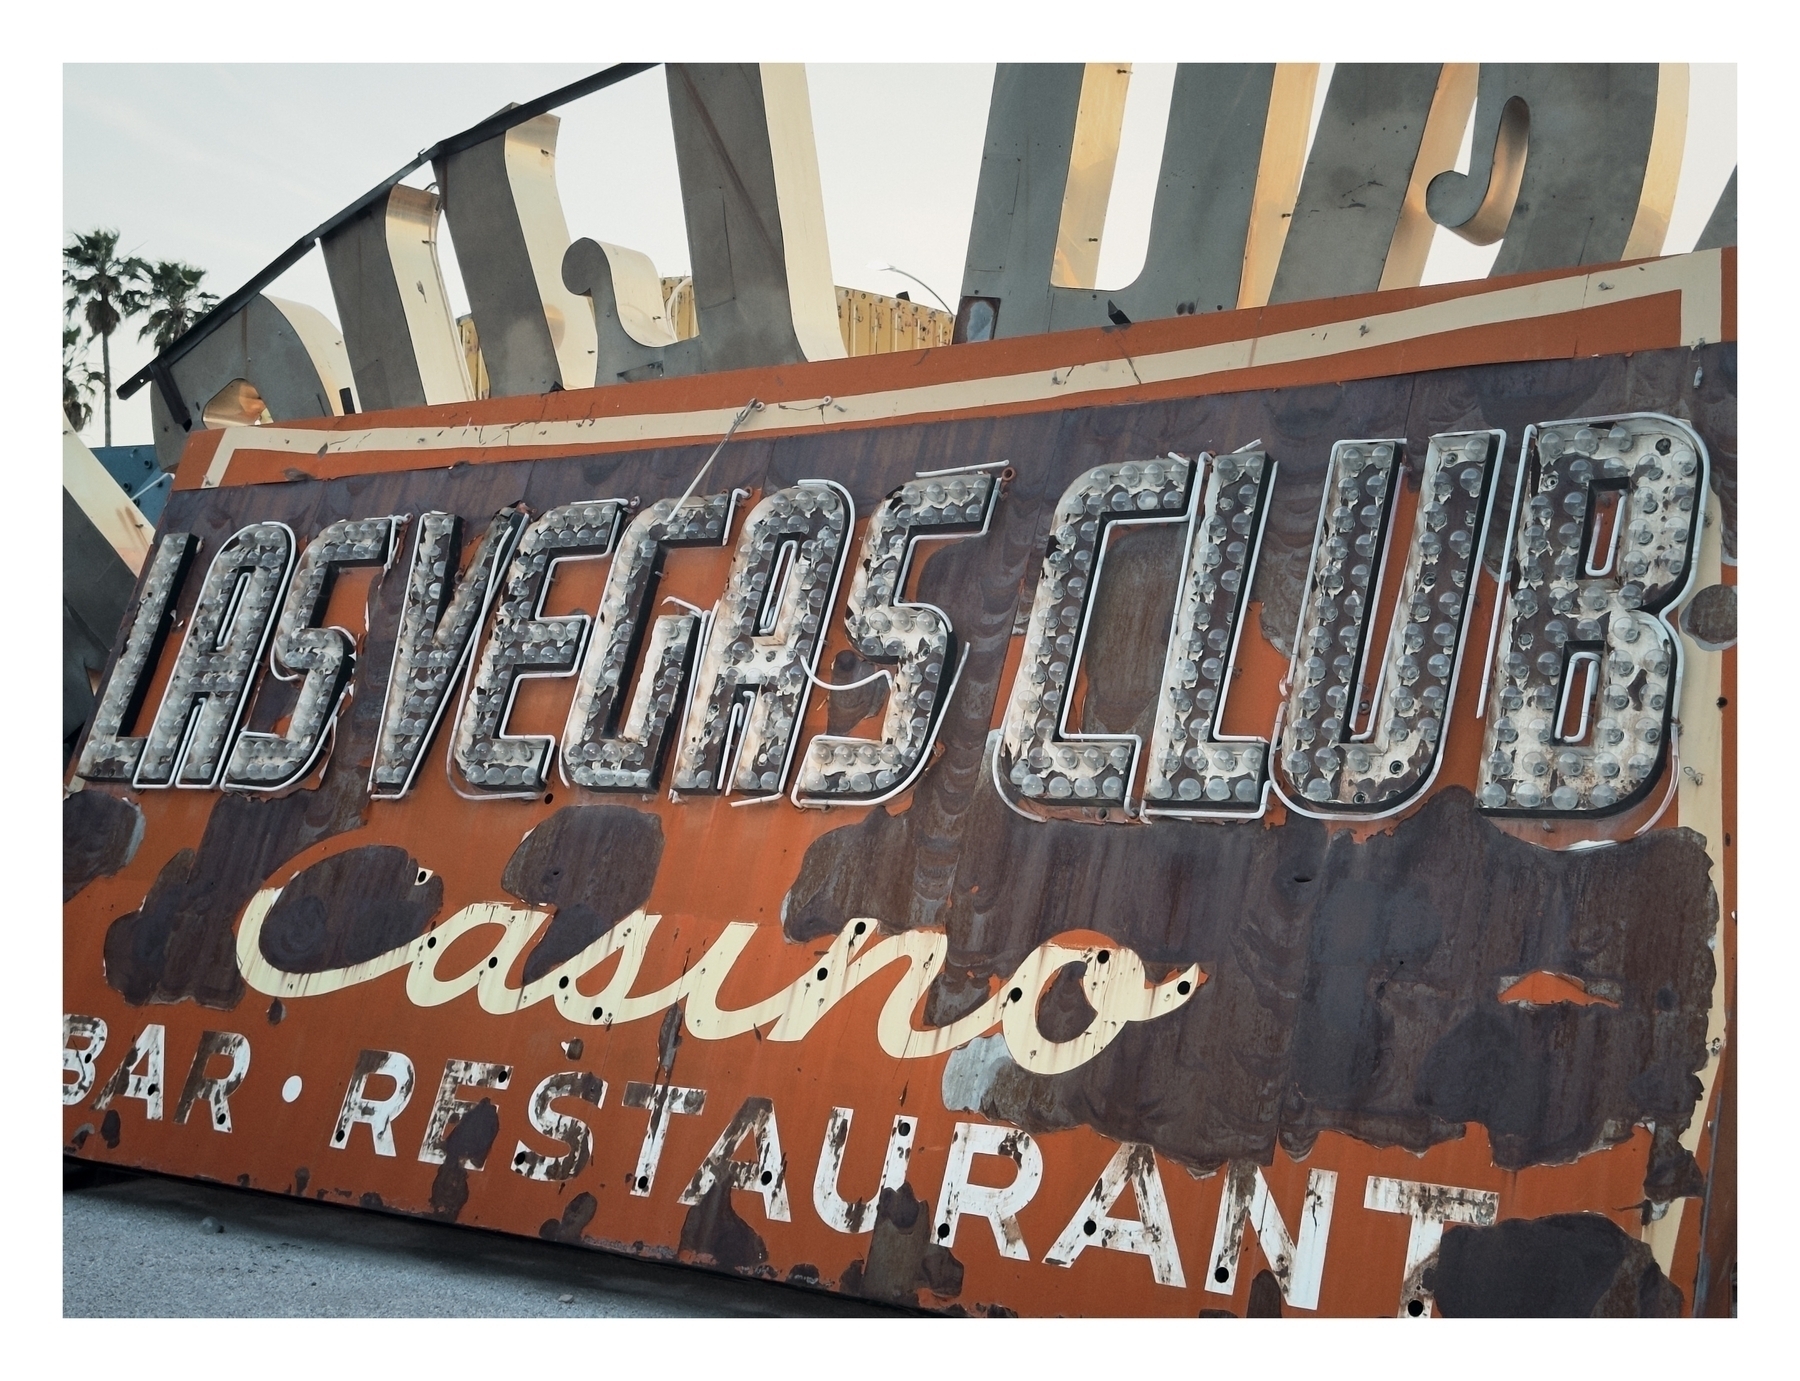 A weathered sign reads “LAS VEGAS CLUB Casino Bar Restaurant,” showcasing faded and rusted letters against a decaying background, evoking nostalgia.